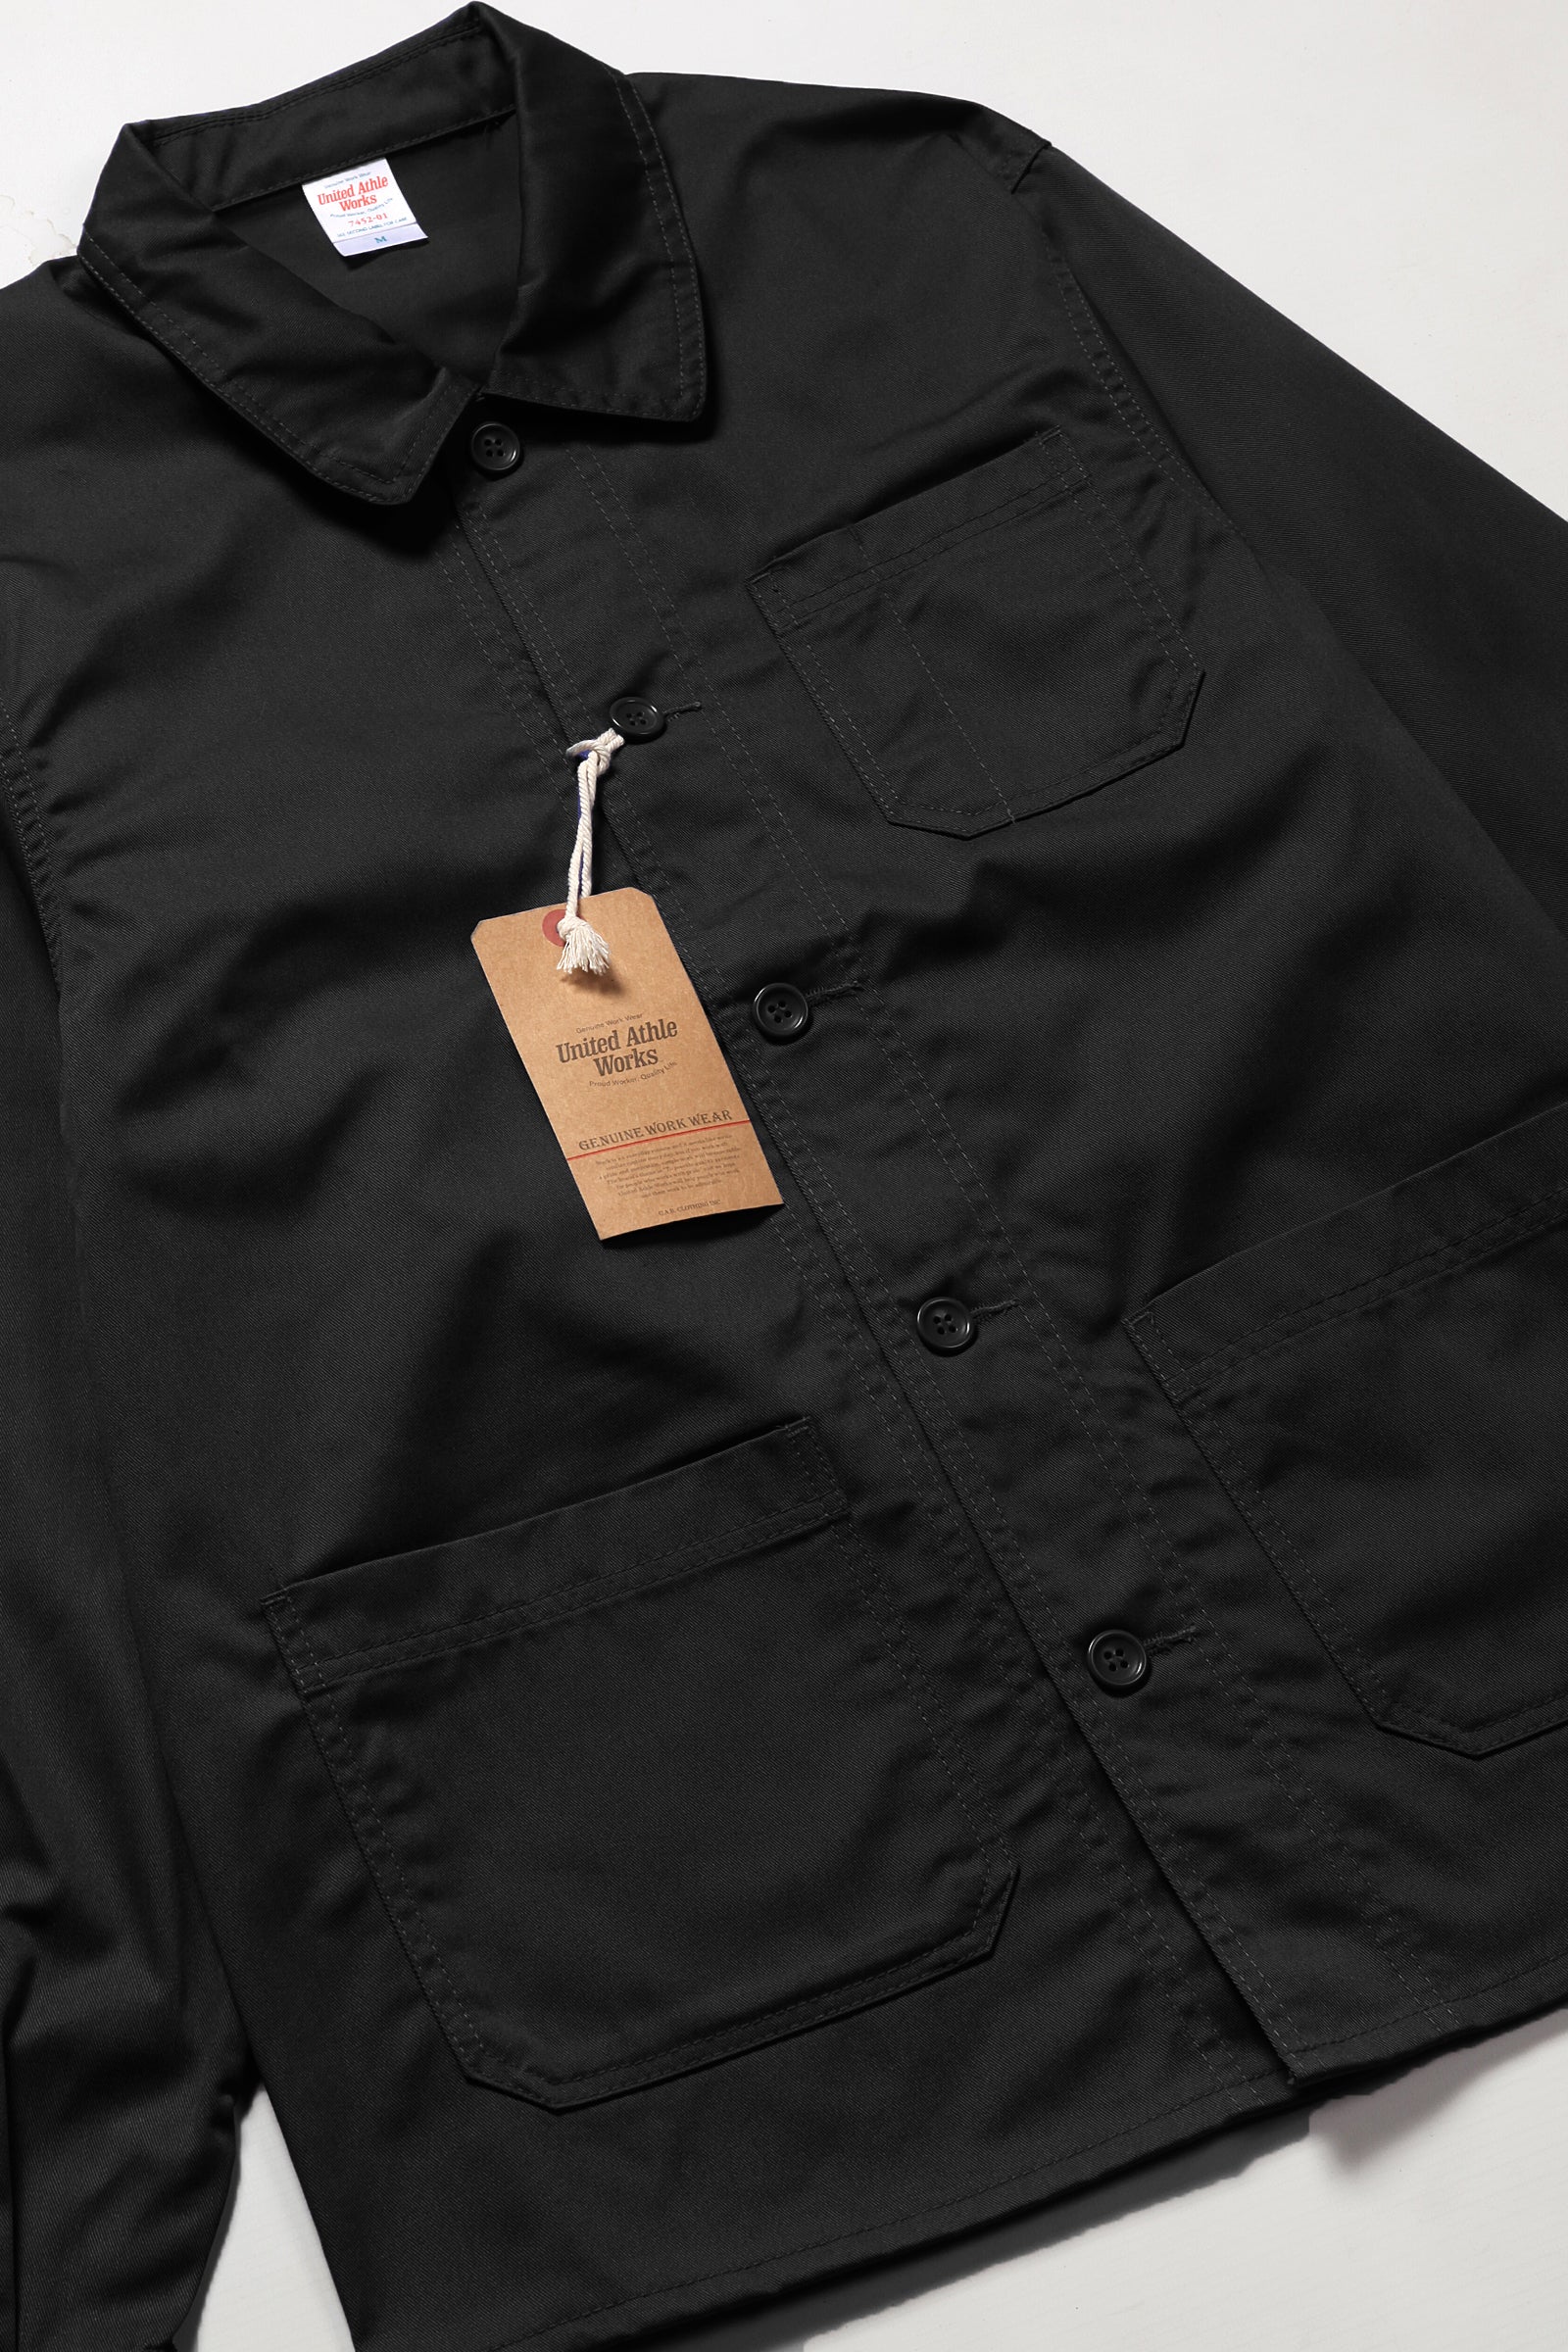 United Athle Works - 7452 Coverall Jacket - Black